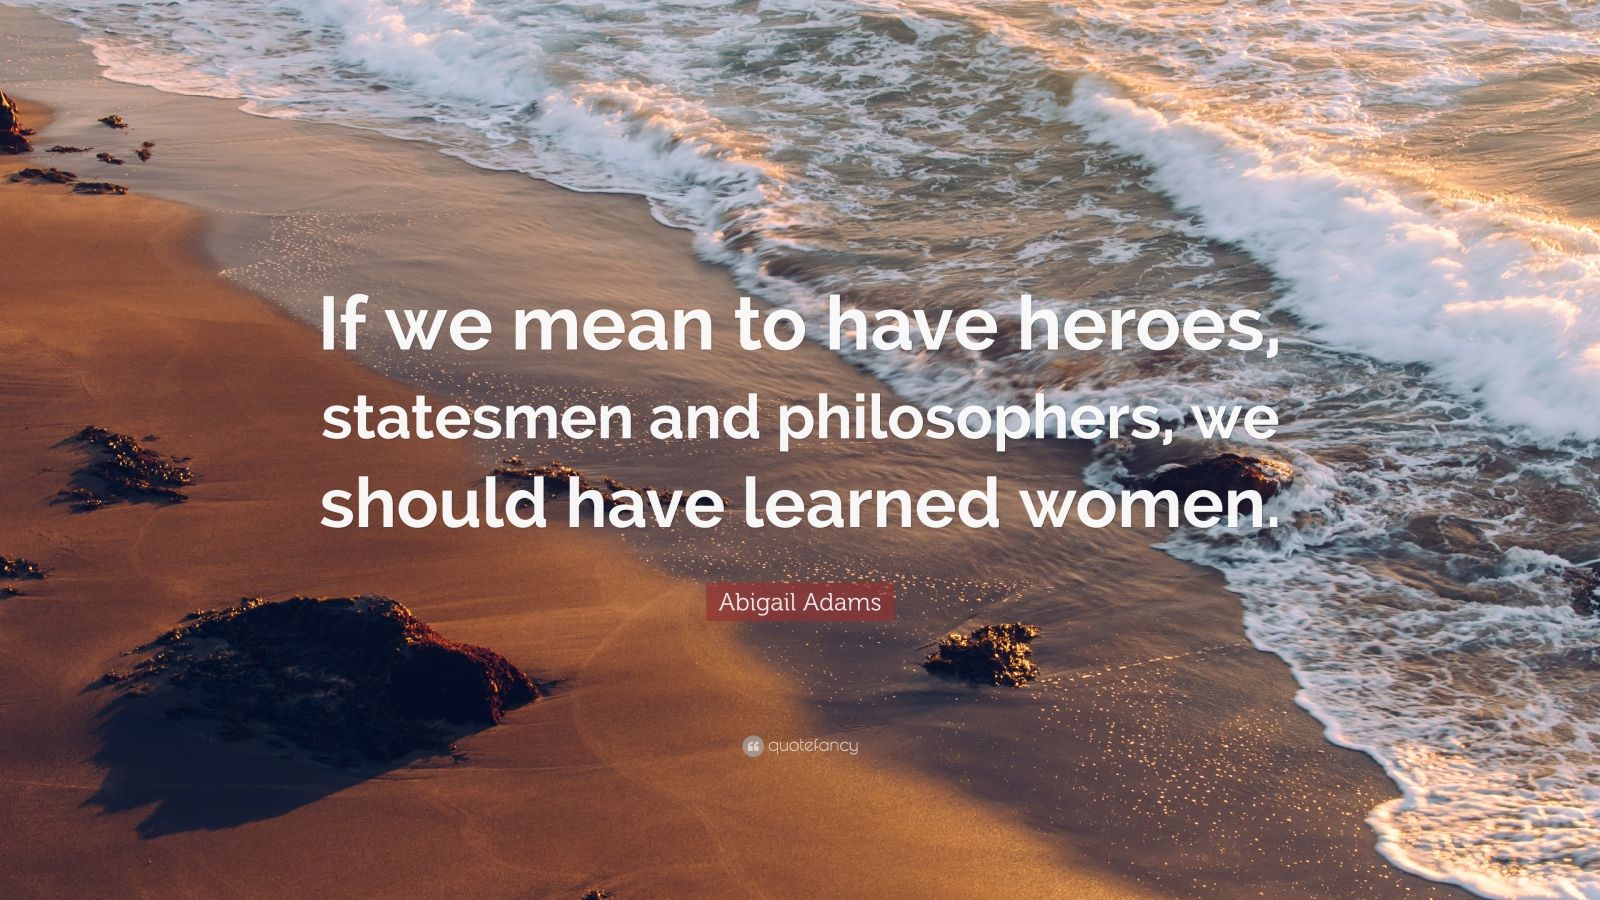 Abigail Adams Quote “If we mean to have heroes, statesmen and